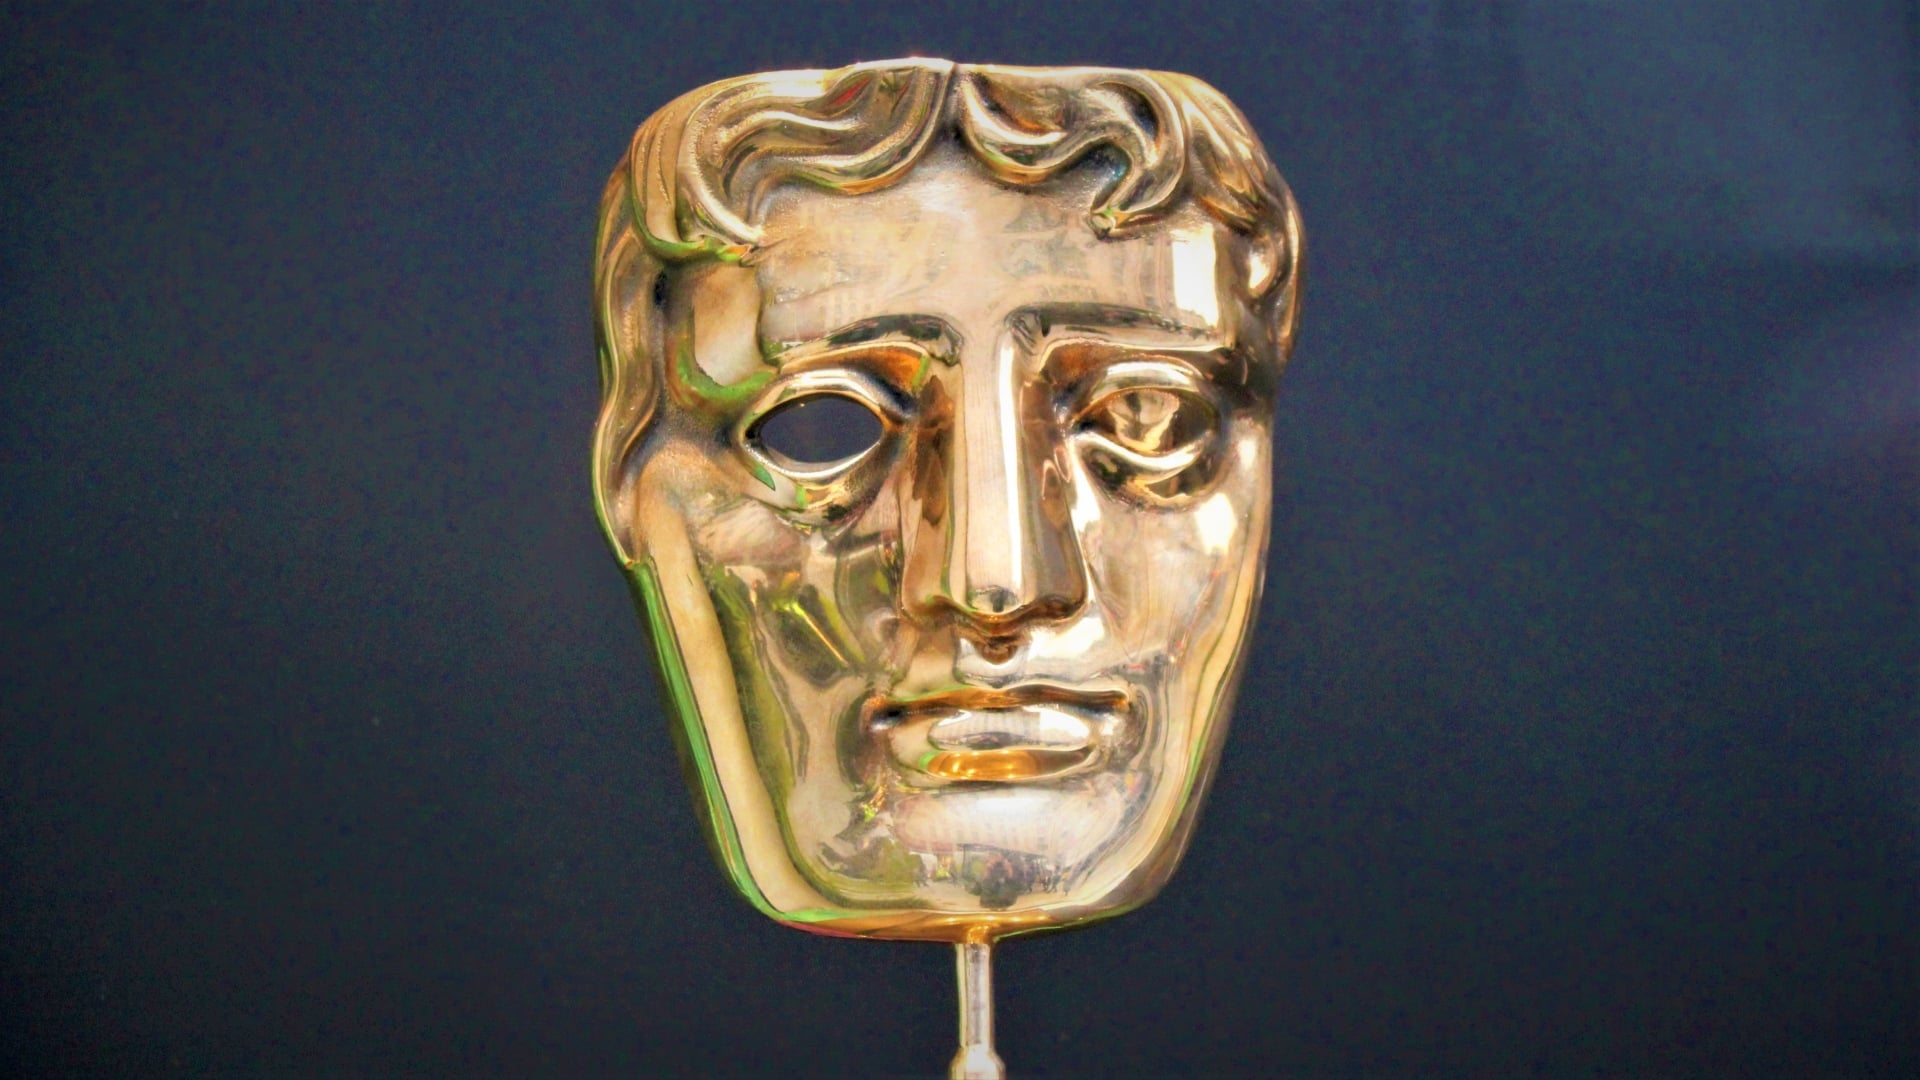 2023 BAFTA Games Awards Announces EE Game Of The Year Nominees